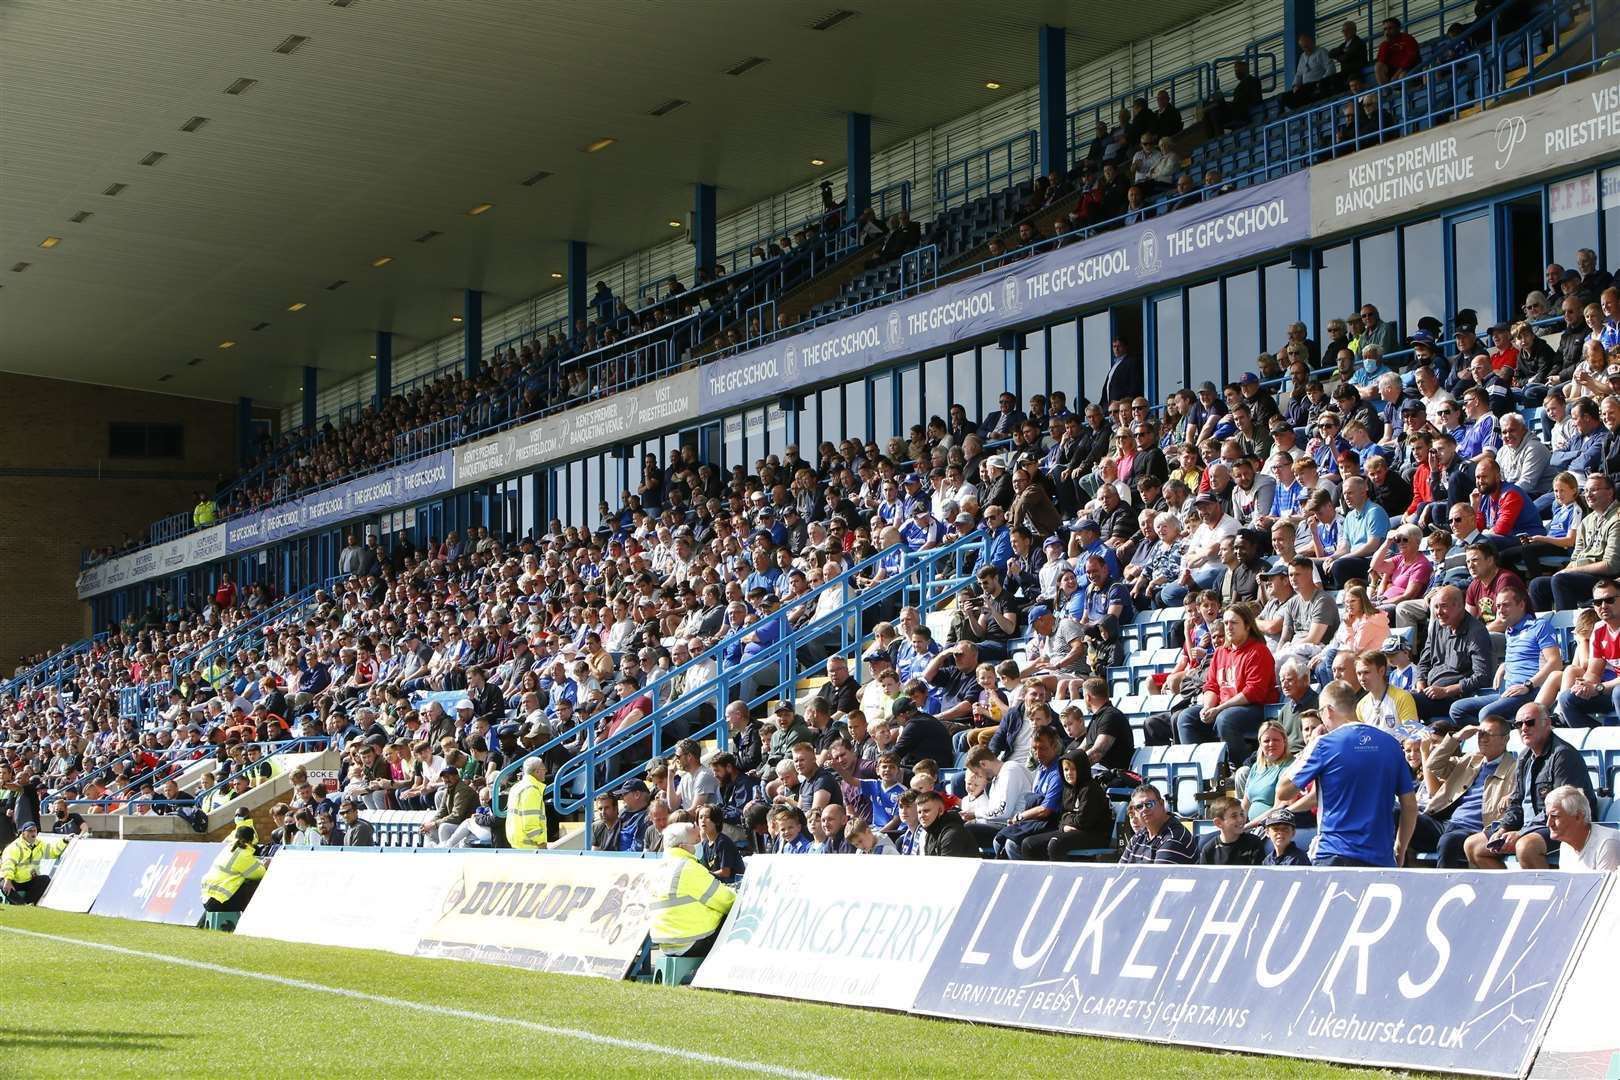 Gillingham’s Priestfield Stadium should be well attended next season